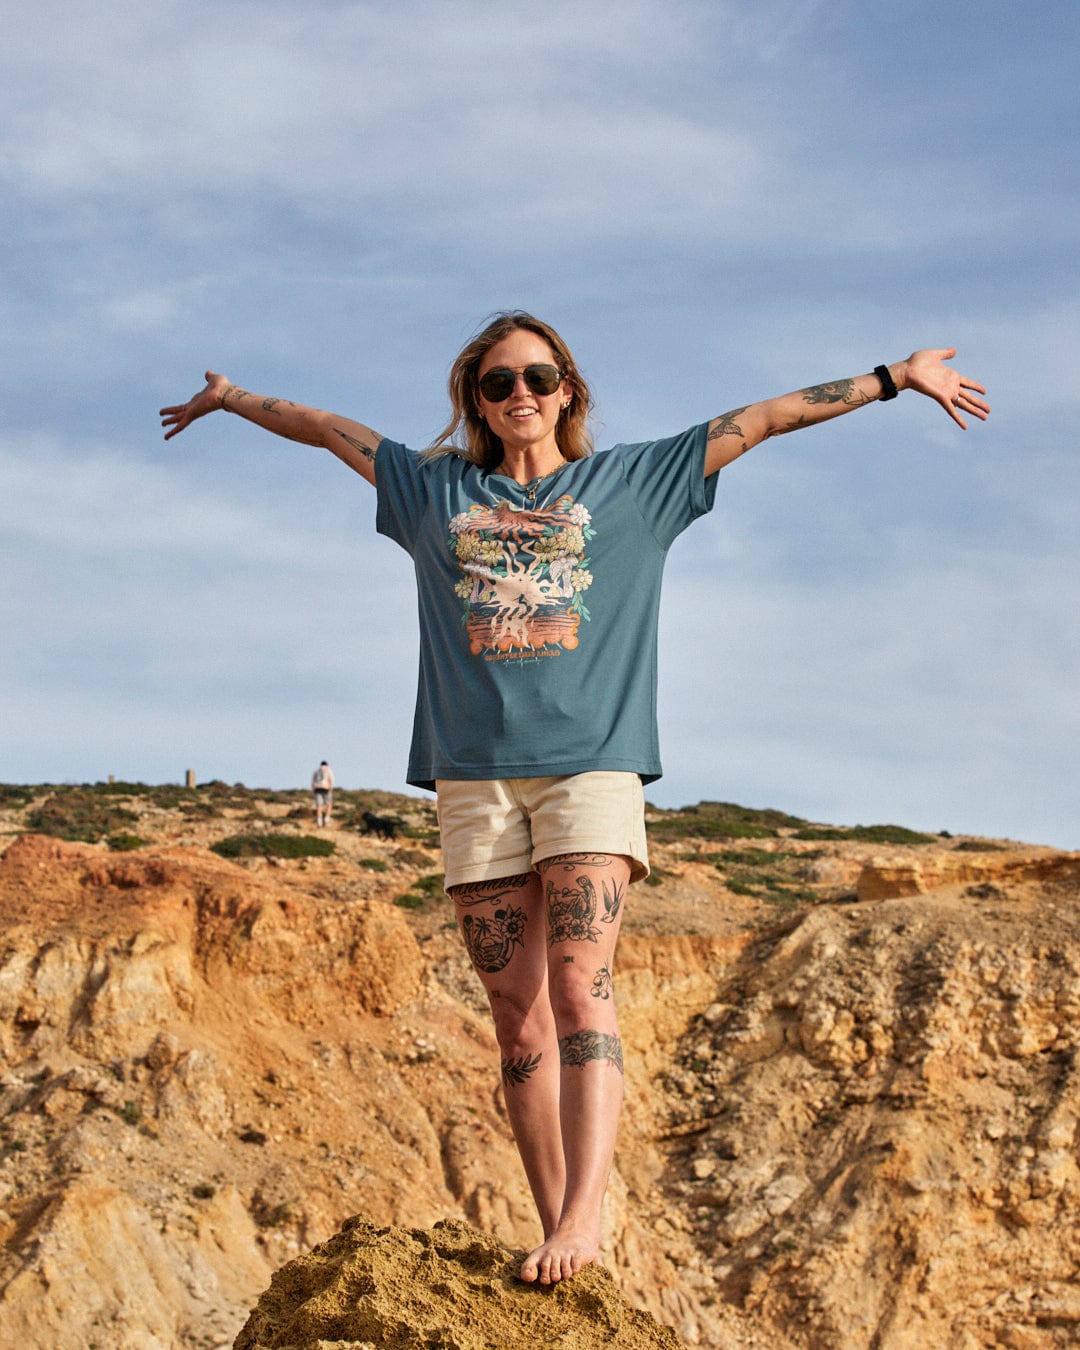 Woman standing on a rocky hill with arms spread wide, smiling, wearing a Saltrock Better Days - Recycled Womens Short Sleeve Relaxed T-Shirt in Teal and shorts, with a cloudy sky background and another person in the distance.